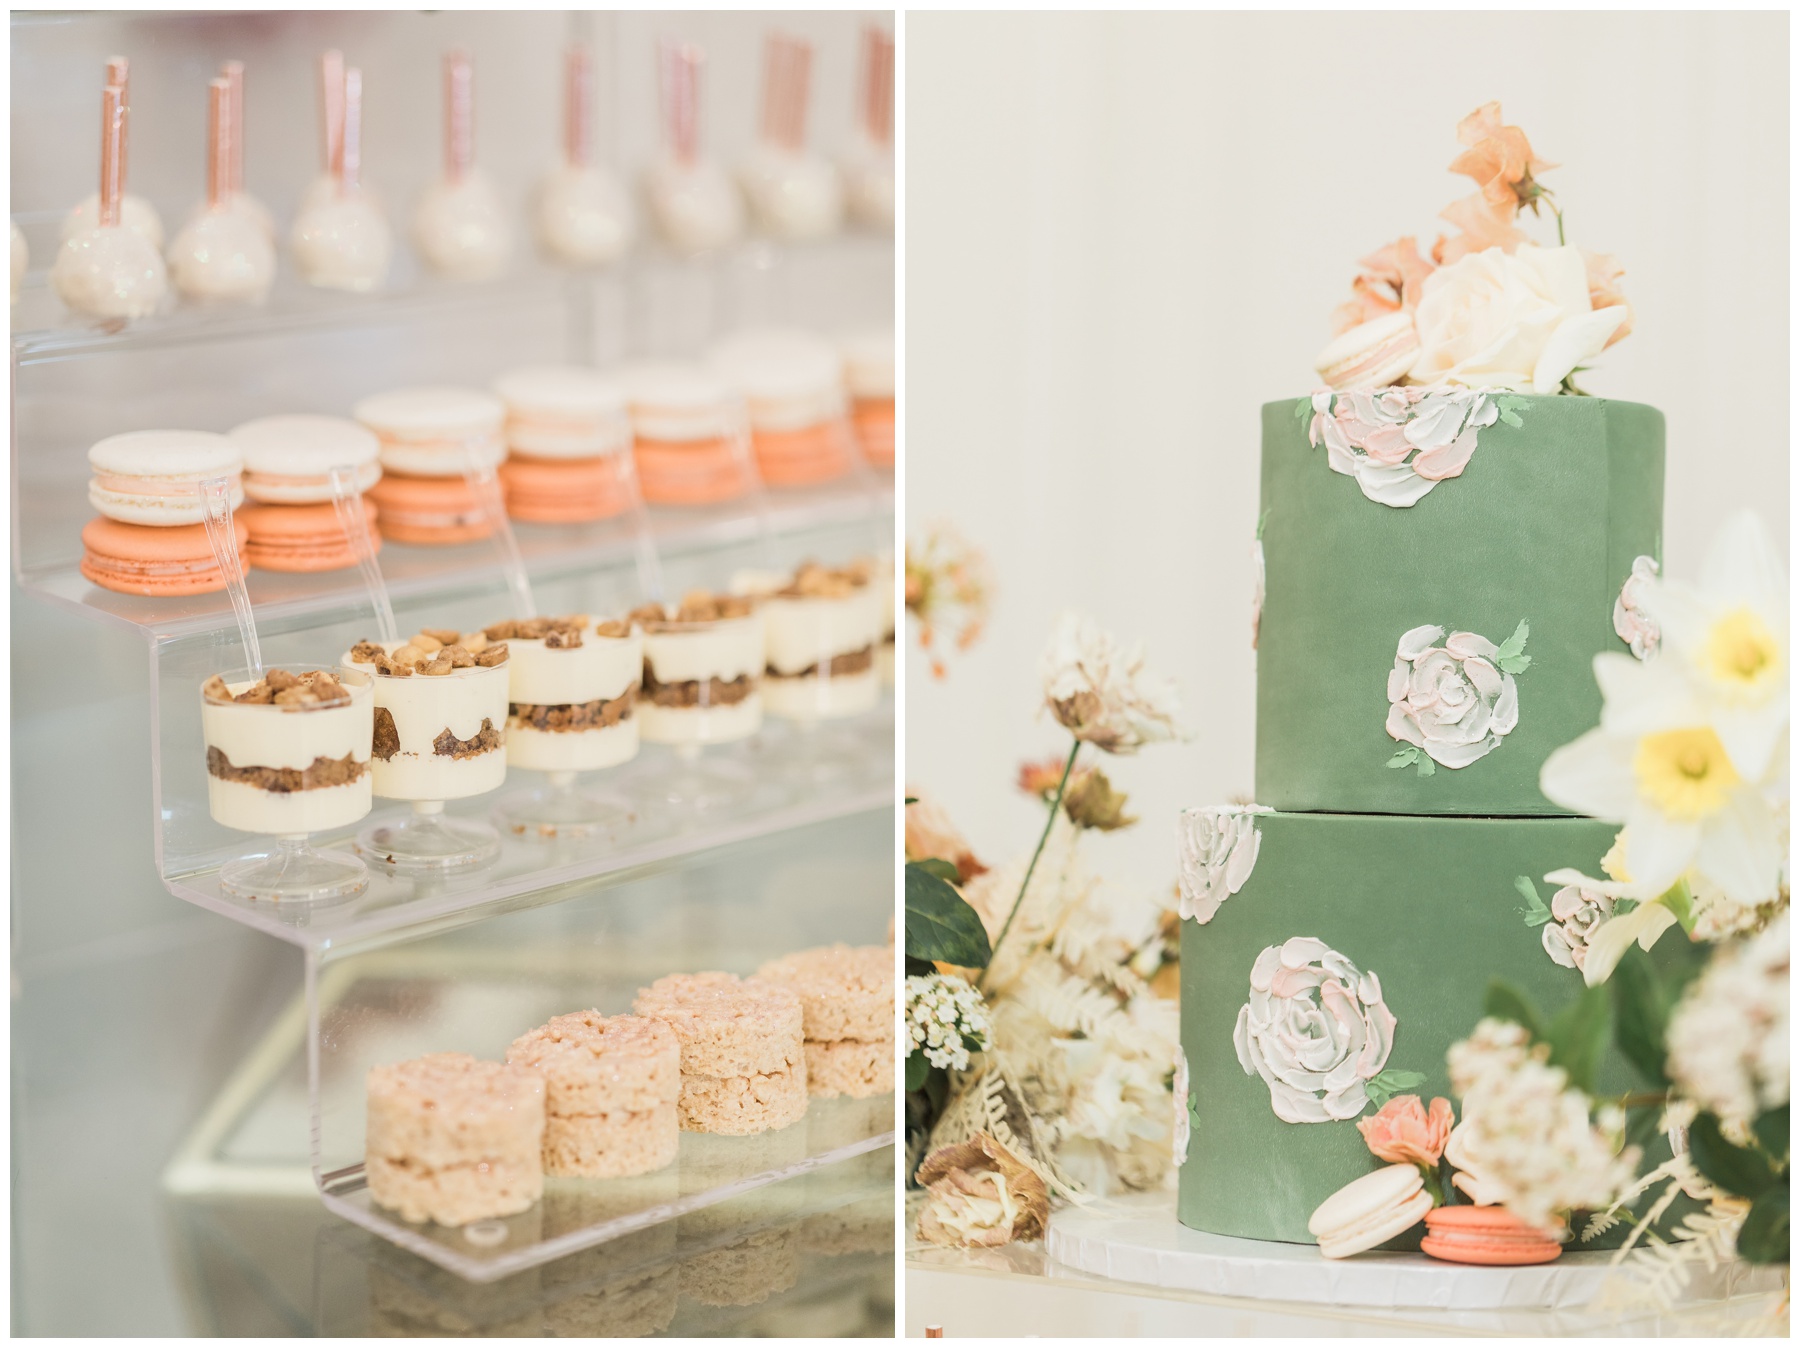 Spring wedding cake from Alchemy Bake Lab with sage green fondant, blush roses, and pink macarons